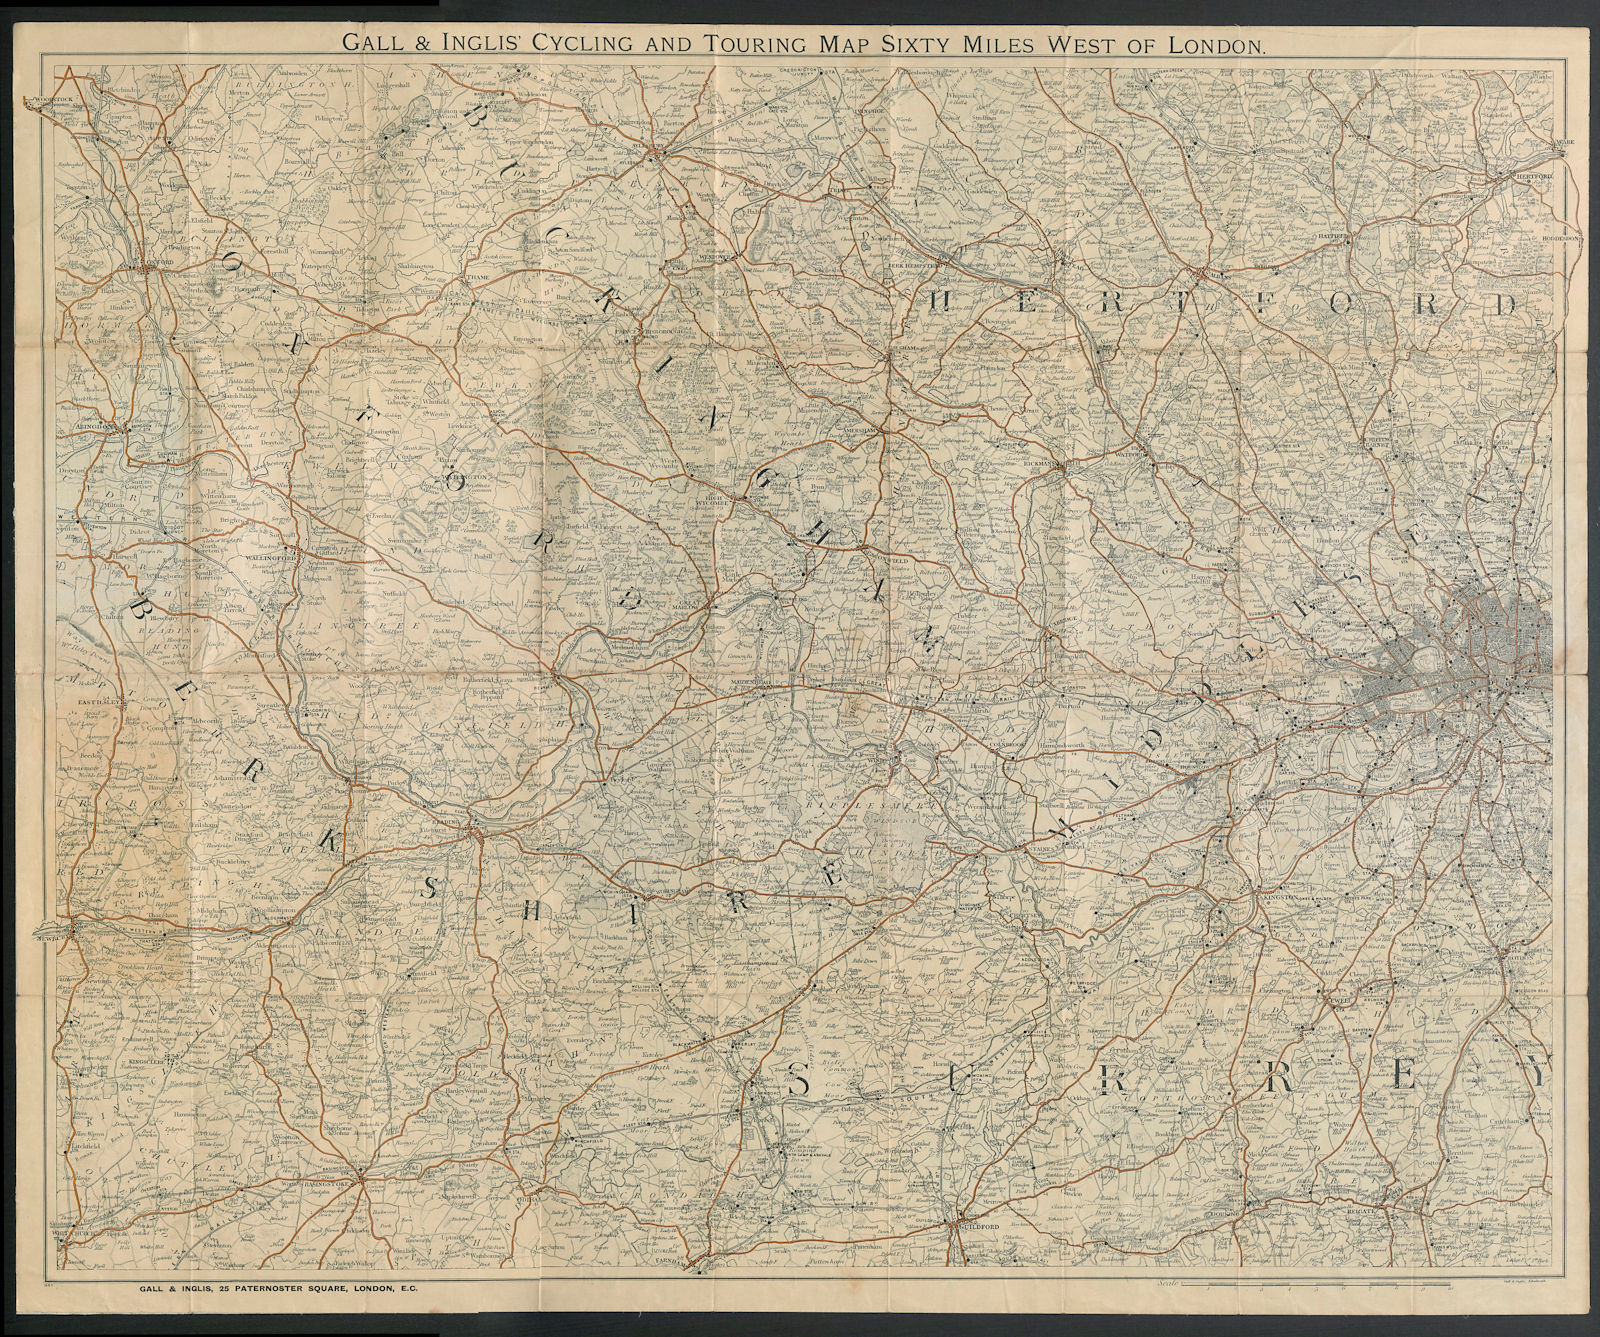 Associate Product Gall & Inglis Cycling & Touring Map 60 miles west of London. Thames Valley c1890